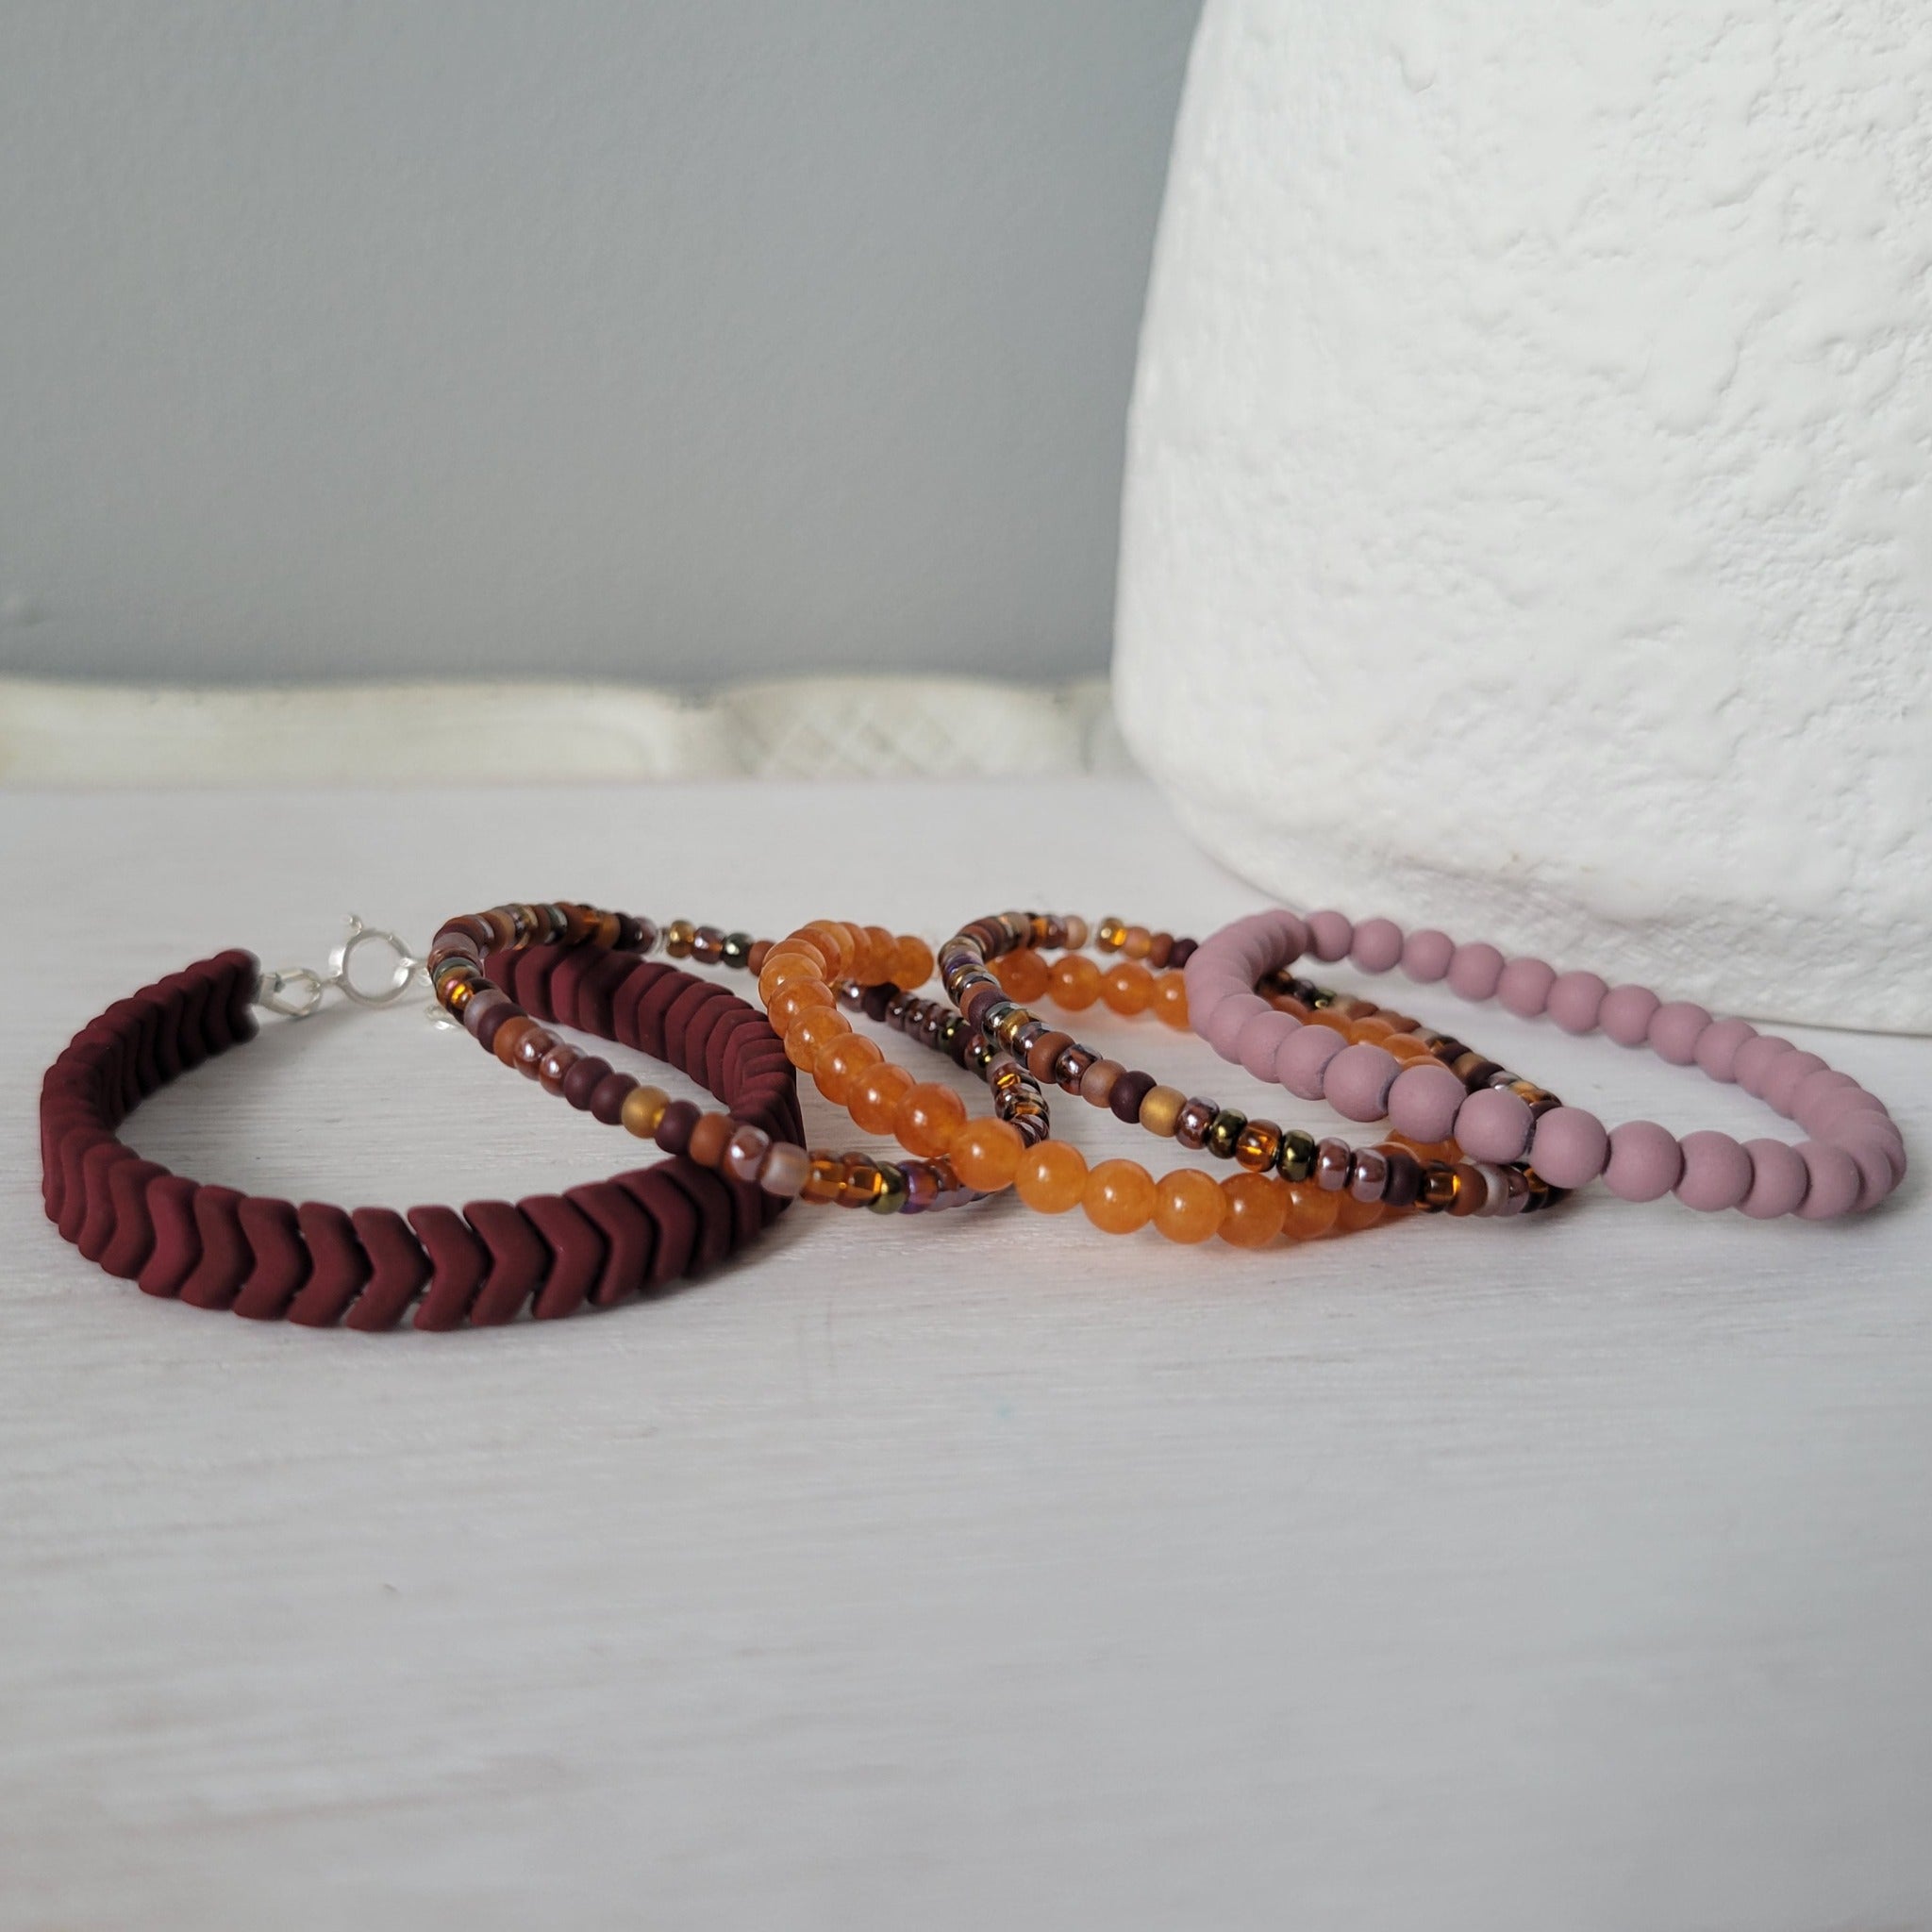 Girl's Fall Vibes Natural Stone and Bead Bracelets - Set of 3 or Each